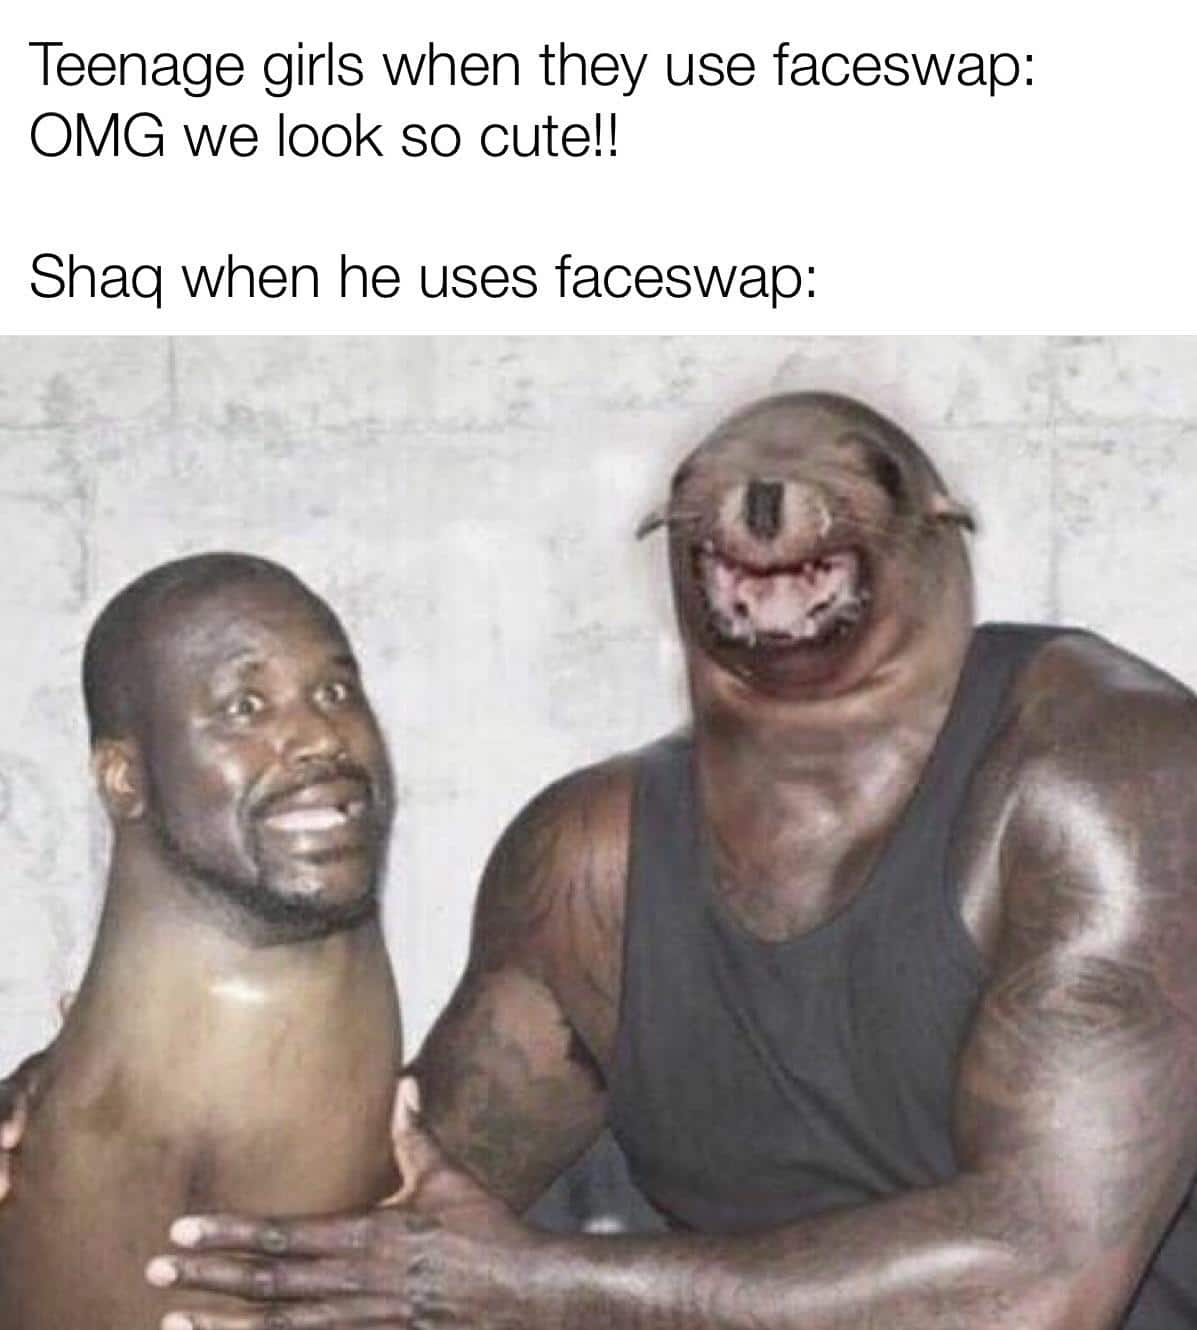 Funny, Shaq, Seal, Neil, Silent Hill, Neal other memes Funny, Shaq, Seal, Neil, Silent Hill, Neal text: Teenage girls when they use faceswap: OMG we look so cute!! Shaq when he uses faceswap: 